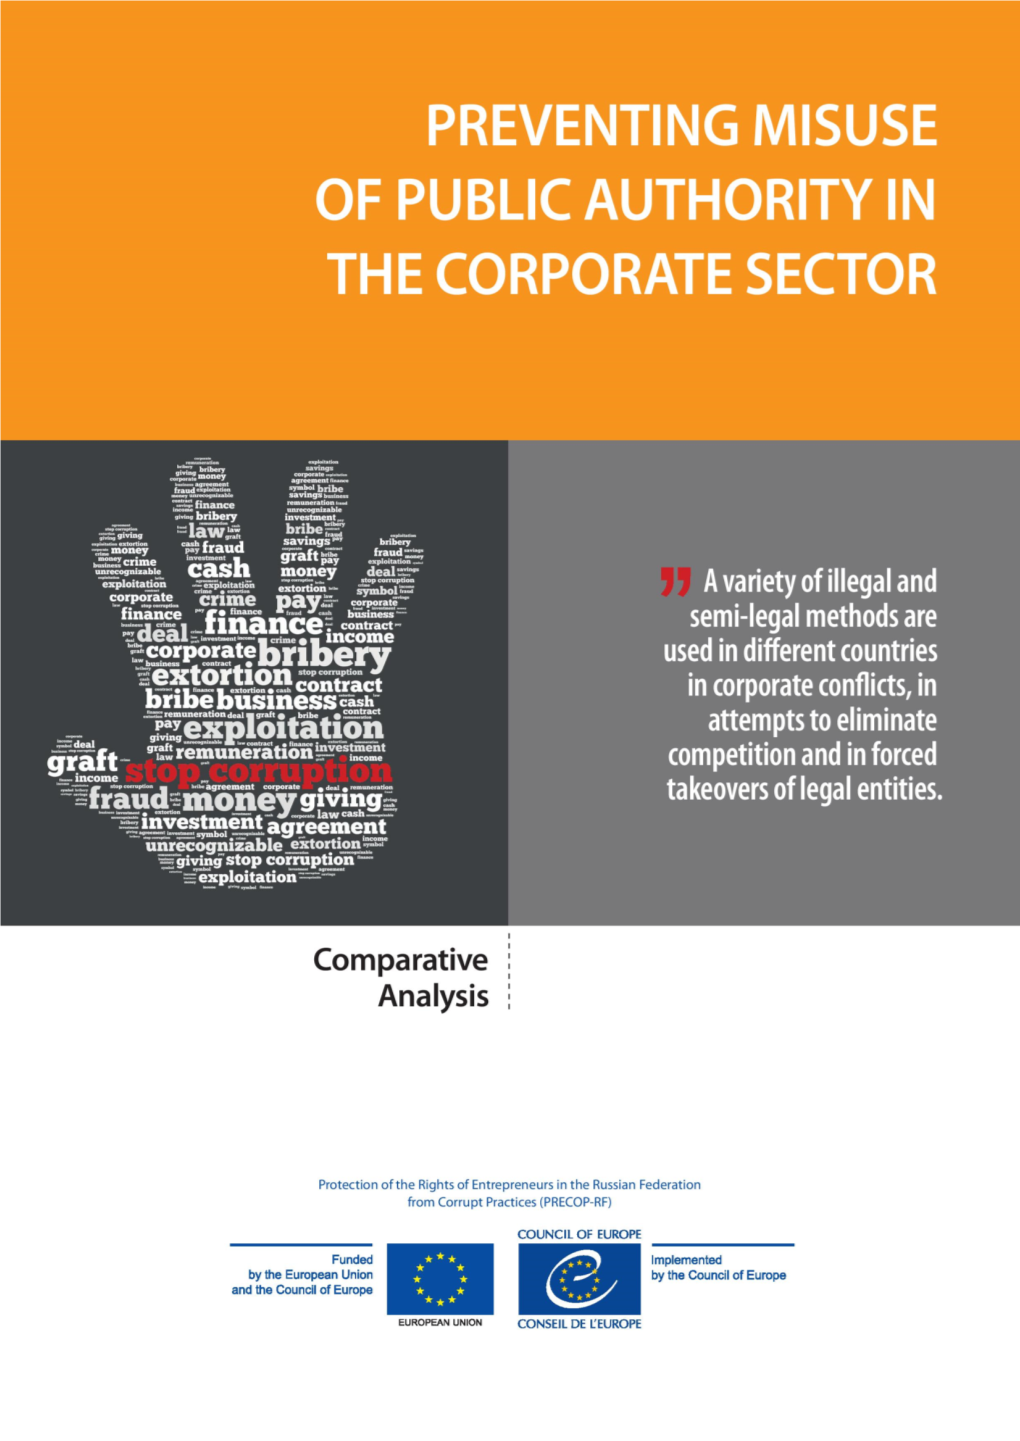 Preventing Misuse of Public Authority in the Corporate Sector